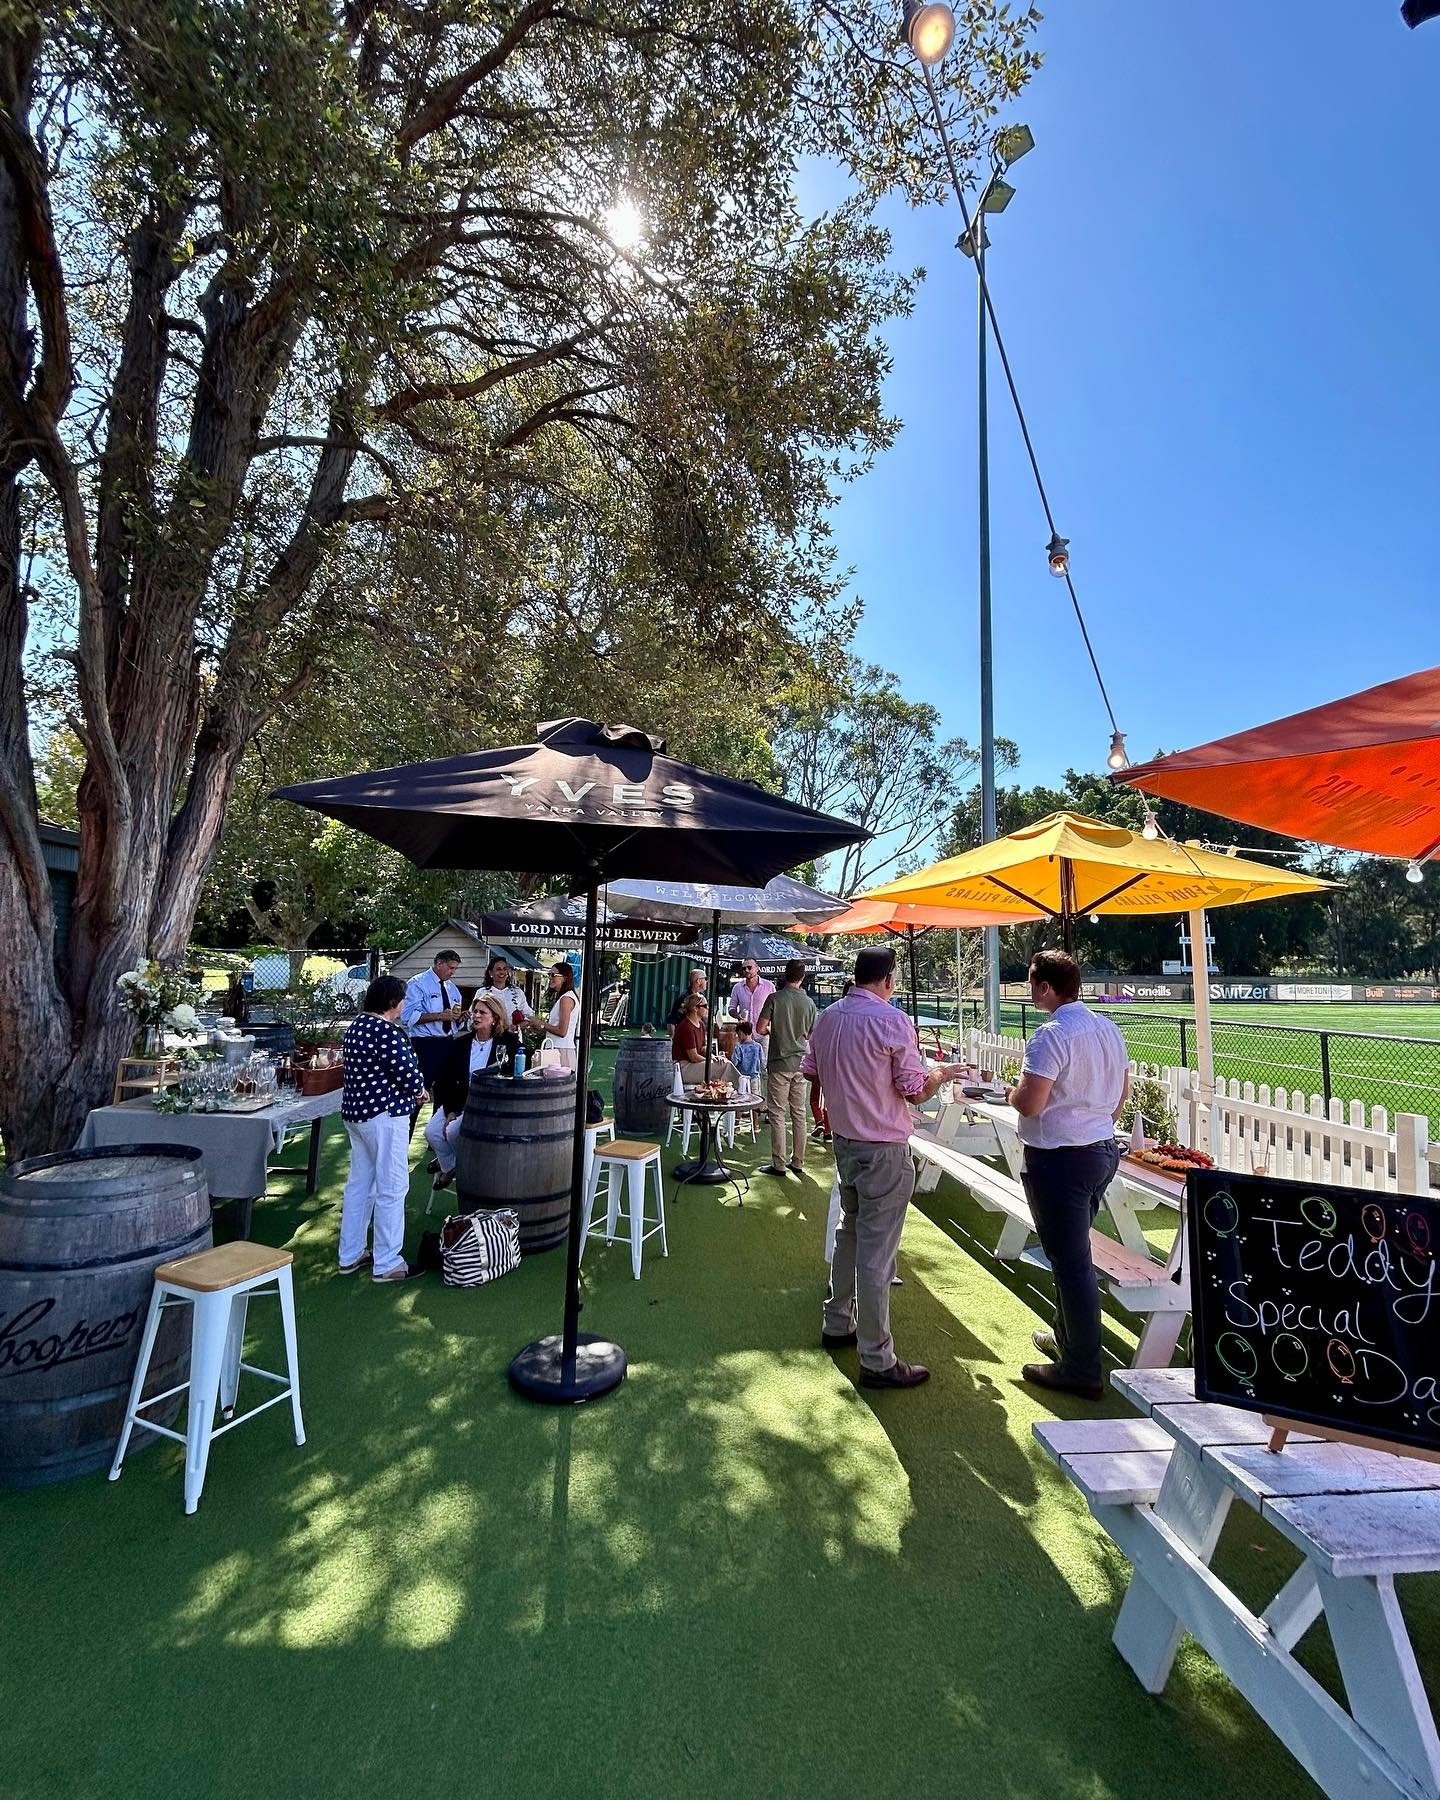 What&rsquo;s on for the rest of the week at The Field? 

🎉 FRIDAY
Fun Fam Fridays: Kids Entertainer 5pm 🤹&zwj;♂️
$12 Espresso Martini Special all day ☕

🏈 SATURDAY
Away Game - Venue open as usual from 12pm 🏟️

🍽️ SUNDAY
$30 Sunday Roast Special 